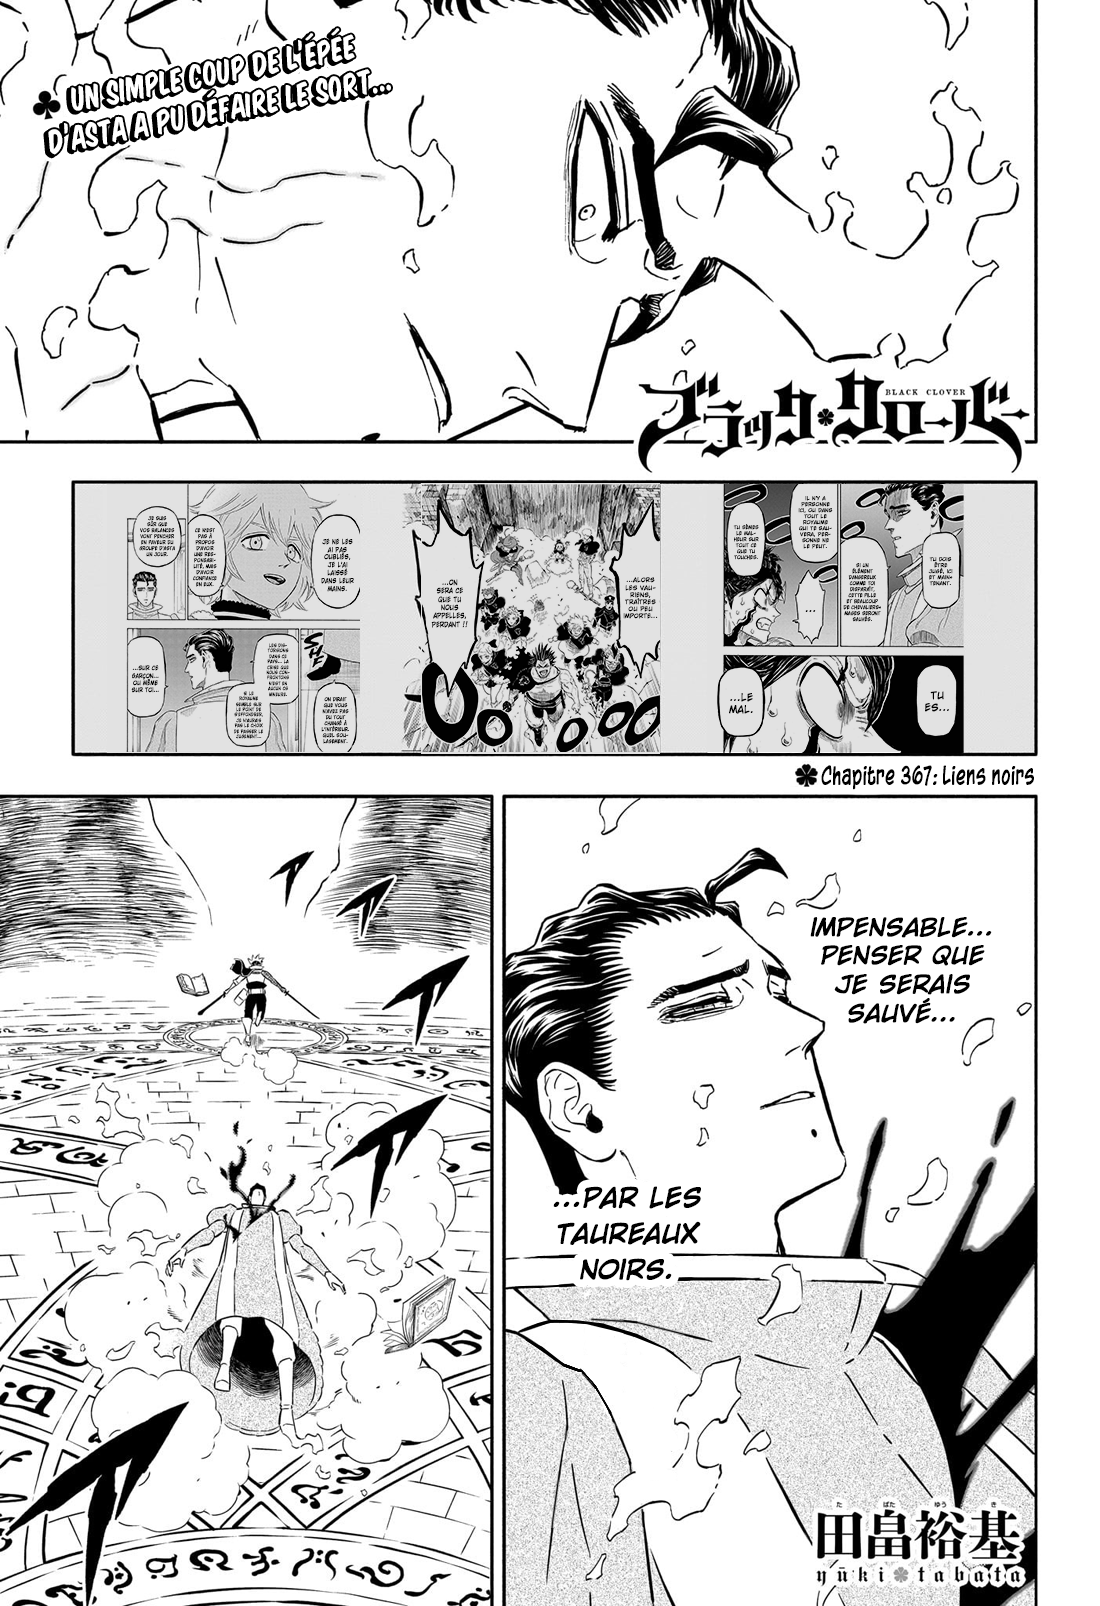 Black Clover: Chapter chapitre-367 - Page 1